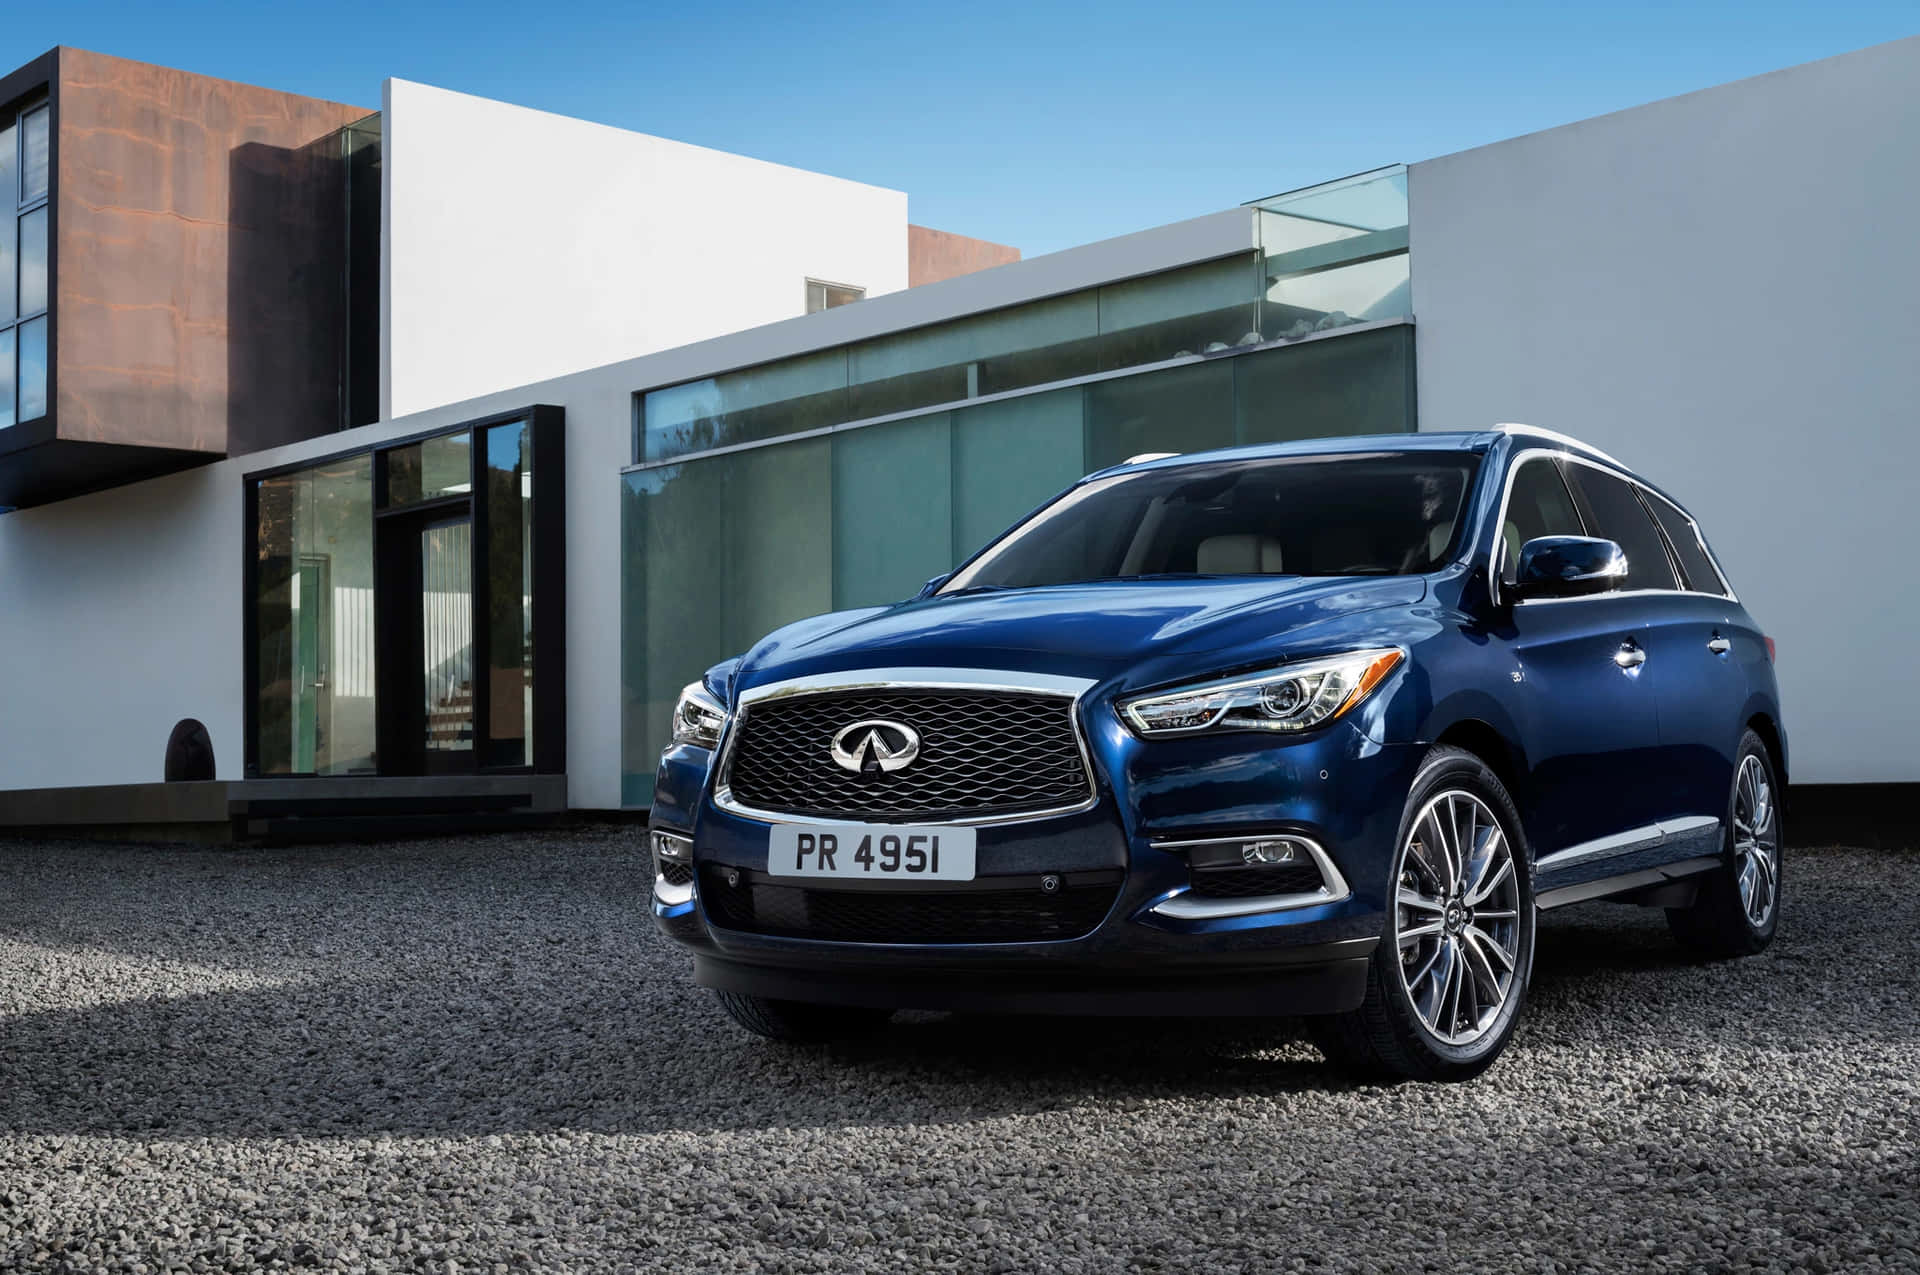 Stunning Infiniti QX60 in Motion on a Beautiful Day Wallpaper